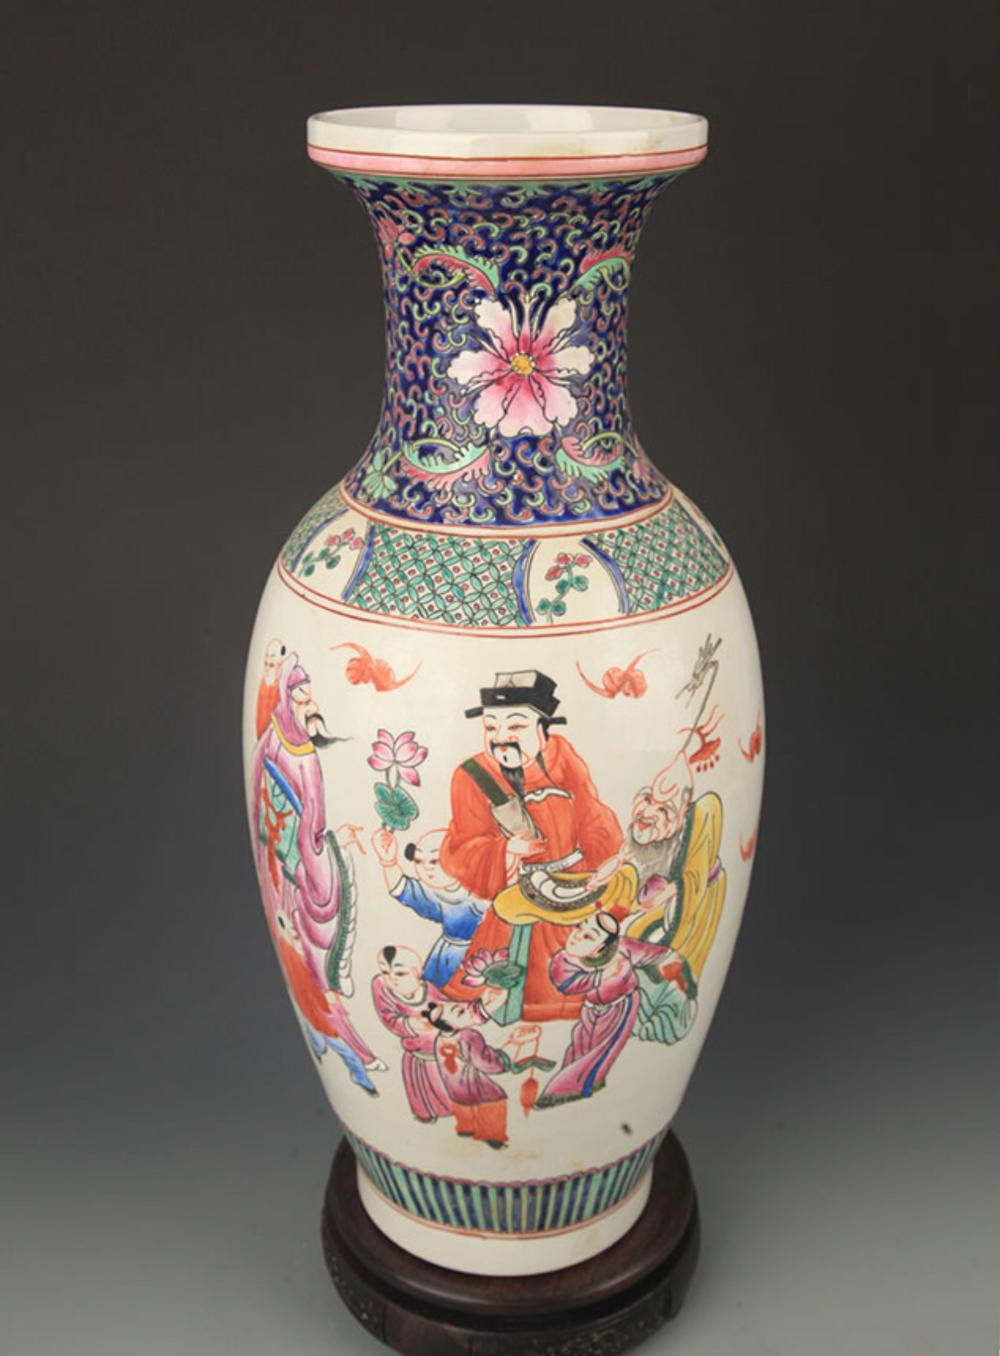 28 Great Pair Of Chinese Cloisonne Vases 2024 free download pair of chinese cloisonne vases of chinese art antiques for sale at online auction modern antique throughout famille rose character pattern porcelain vase